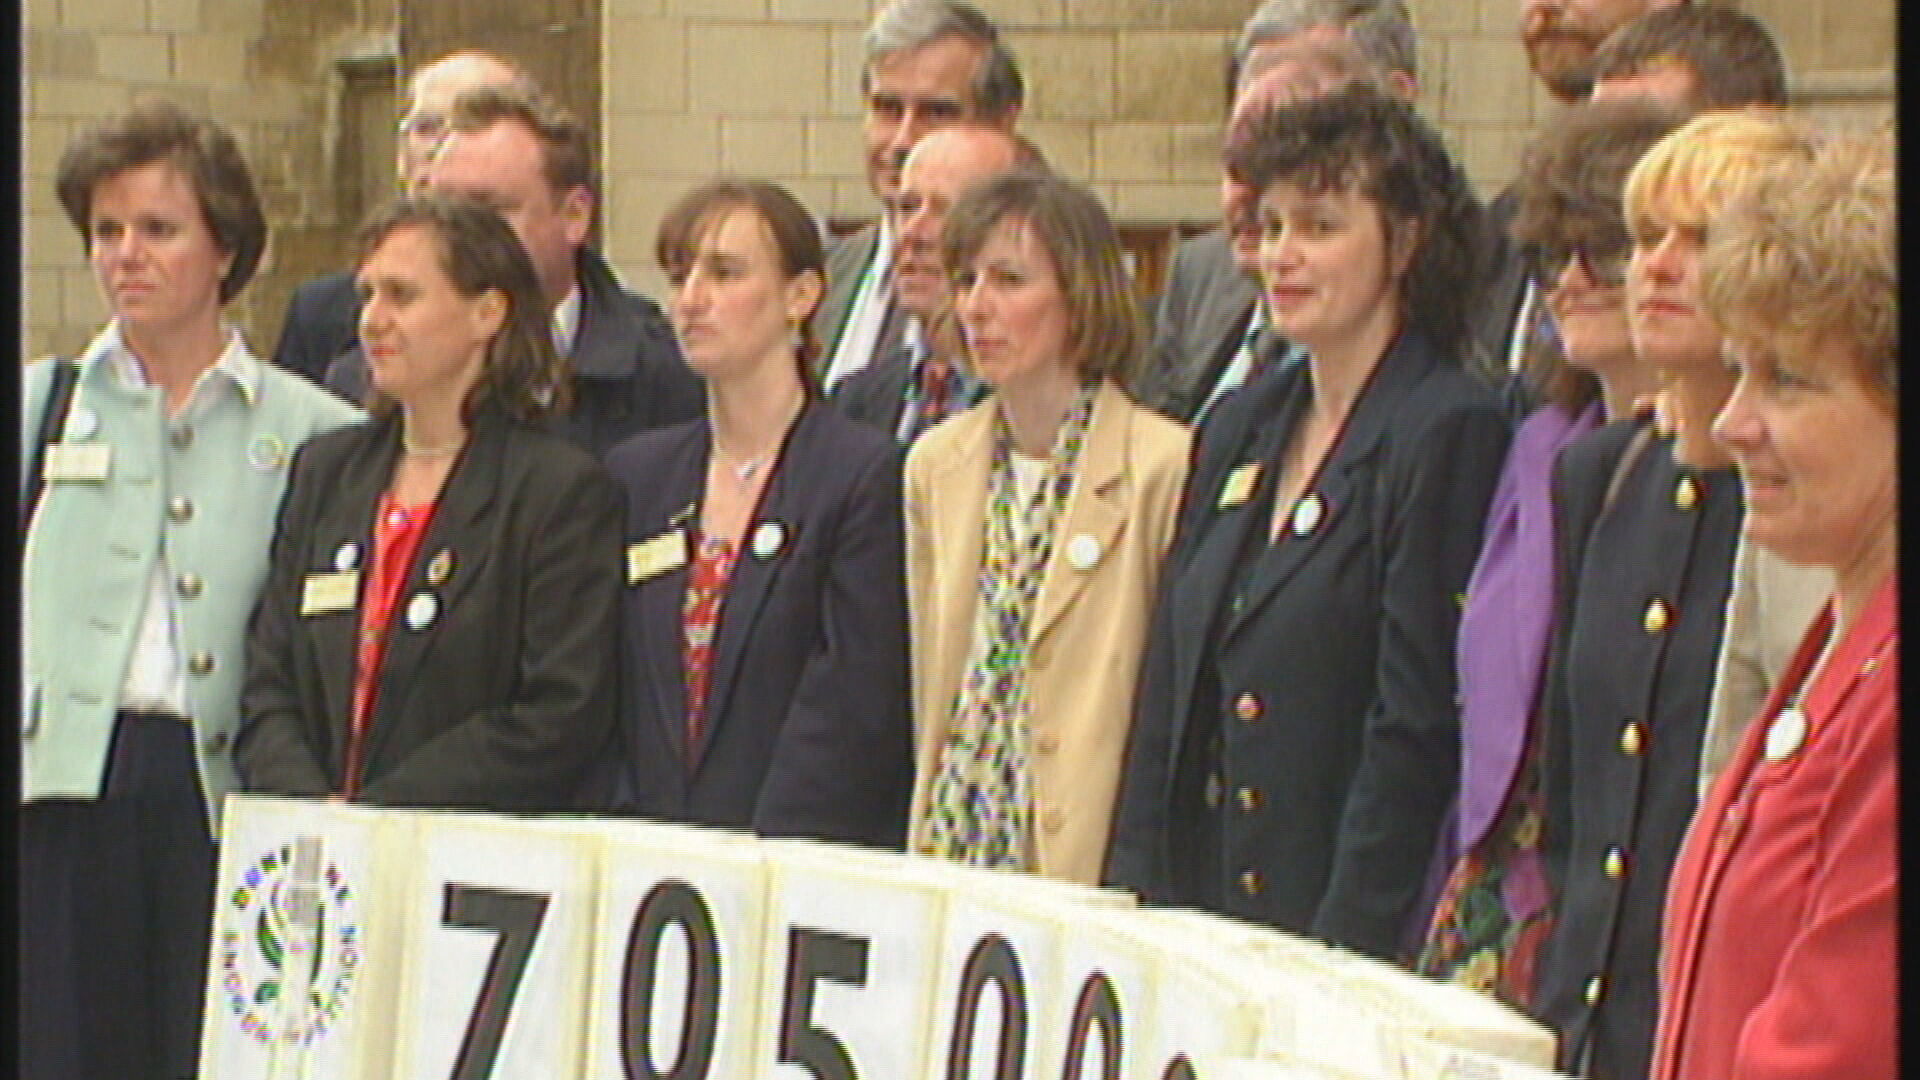 Volunteers and campaigners got the Snowdrop petition to parliament, with the legislation coming into force in 1998